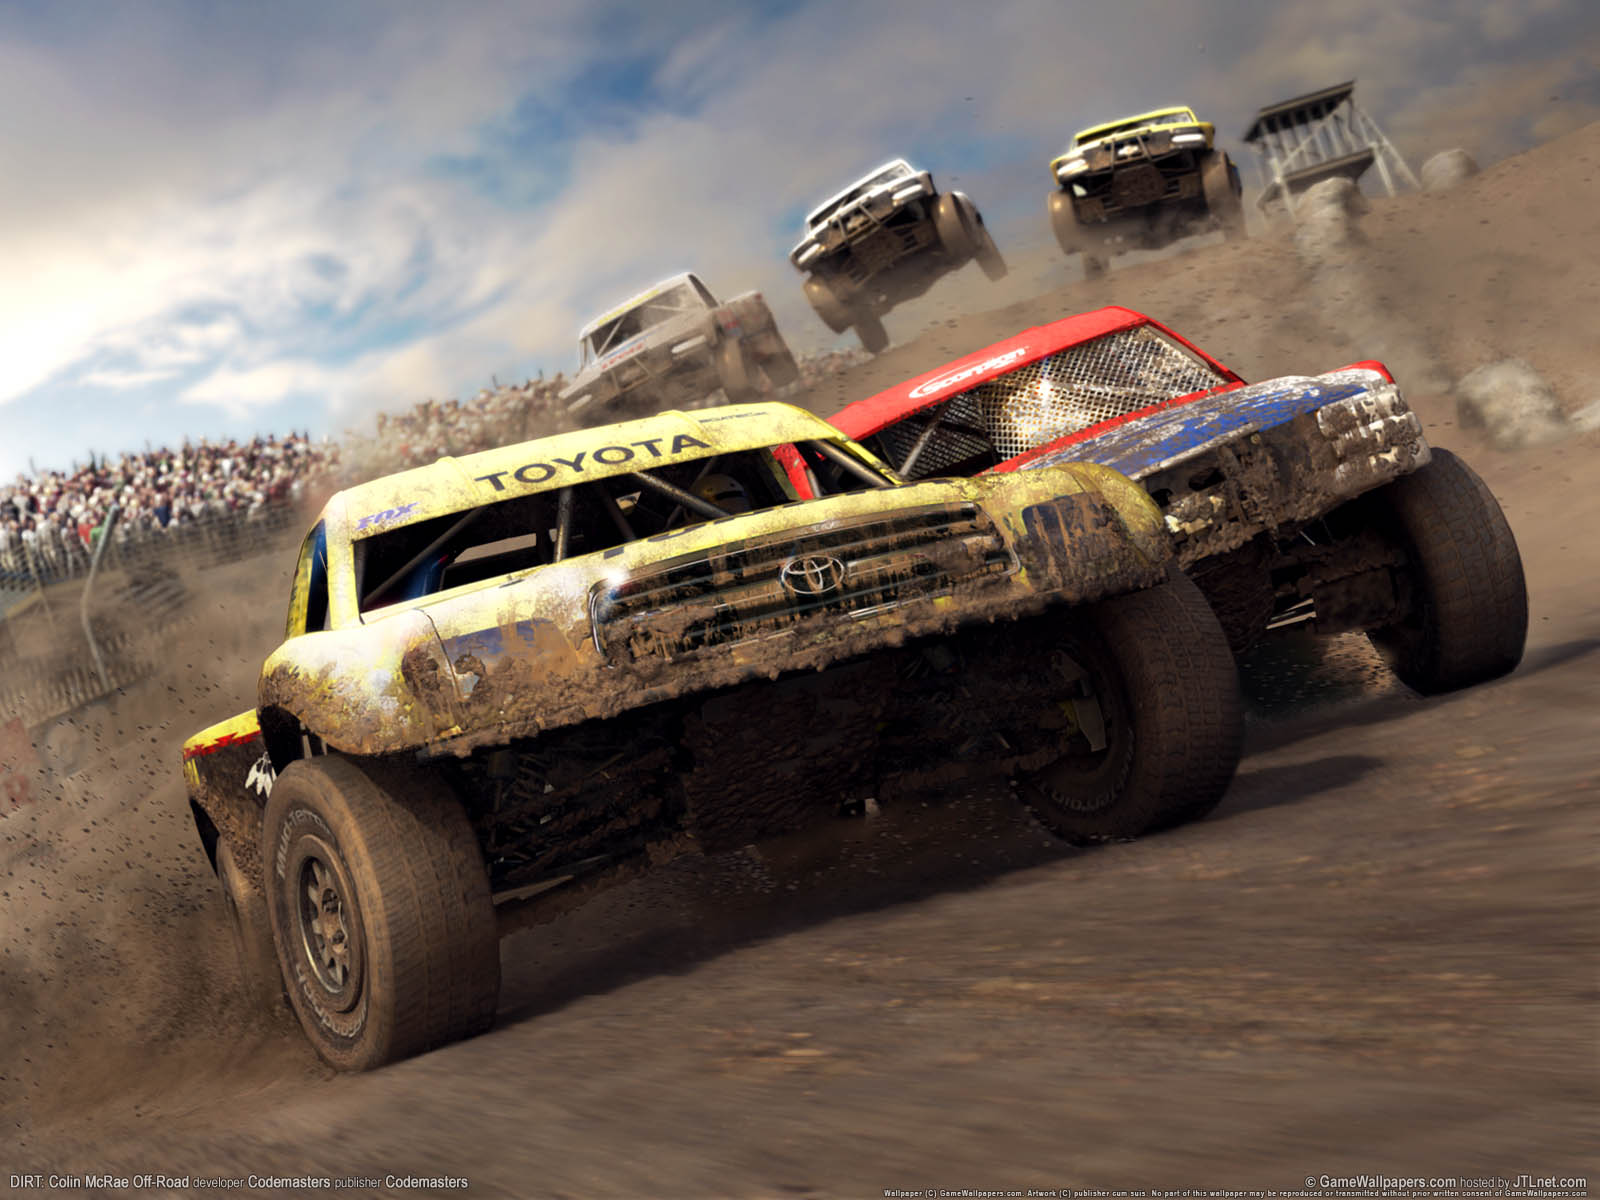 DIRT%253A Colin McRae Off-Road achtergrond 02 1600x1200